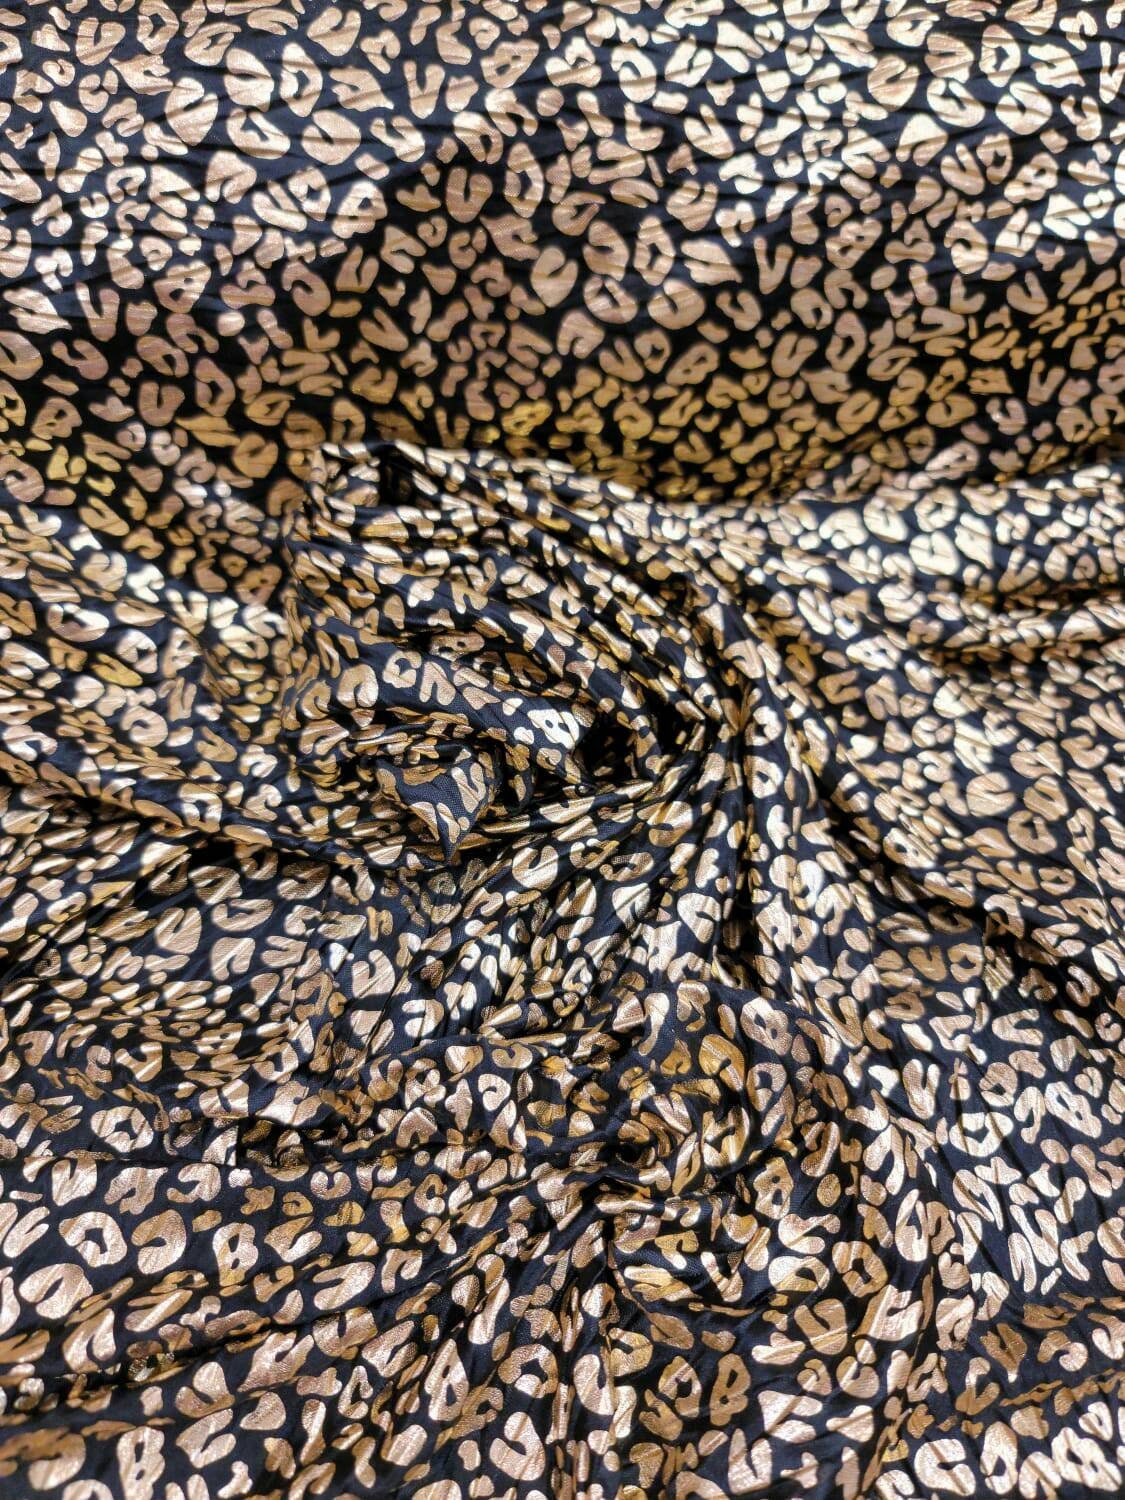 Gold Black Cheetah Stretch Fabric Sold By The Yard Gown Gorgeous Fabric Stretch Clothing Draping Decoration Gorgeous Snake Stretch Fabric